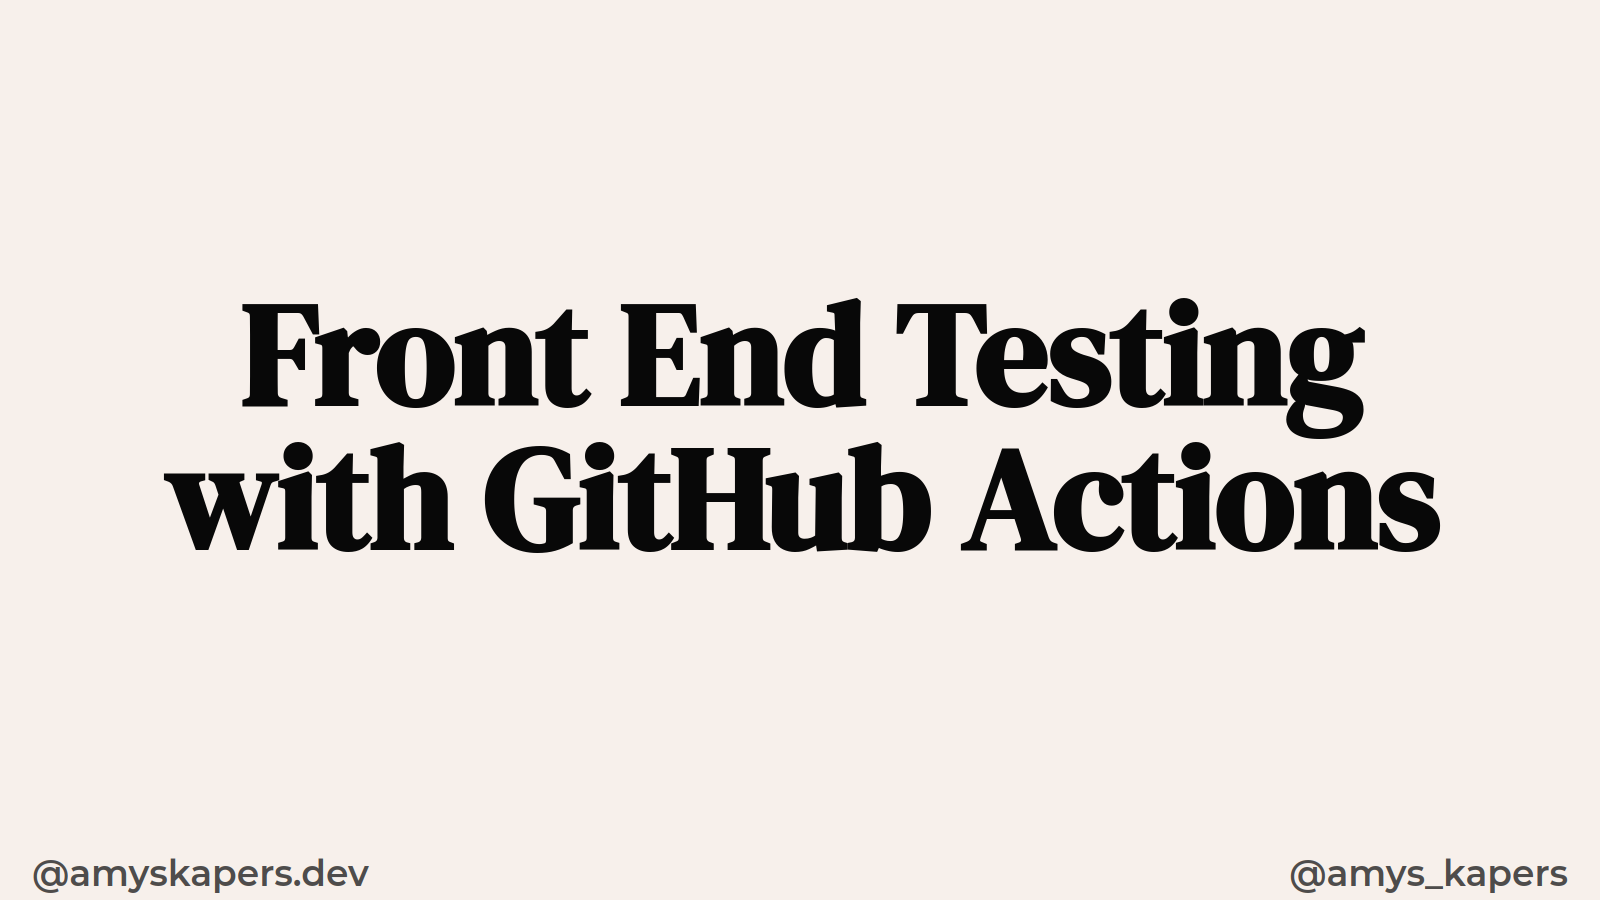 Front End Testing with GitHub Actions